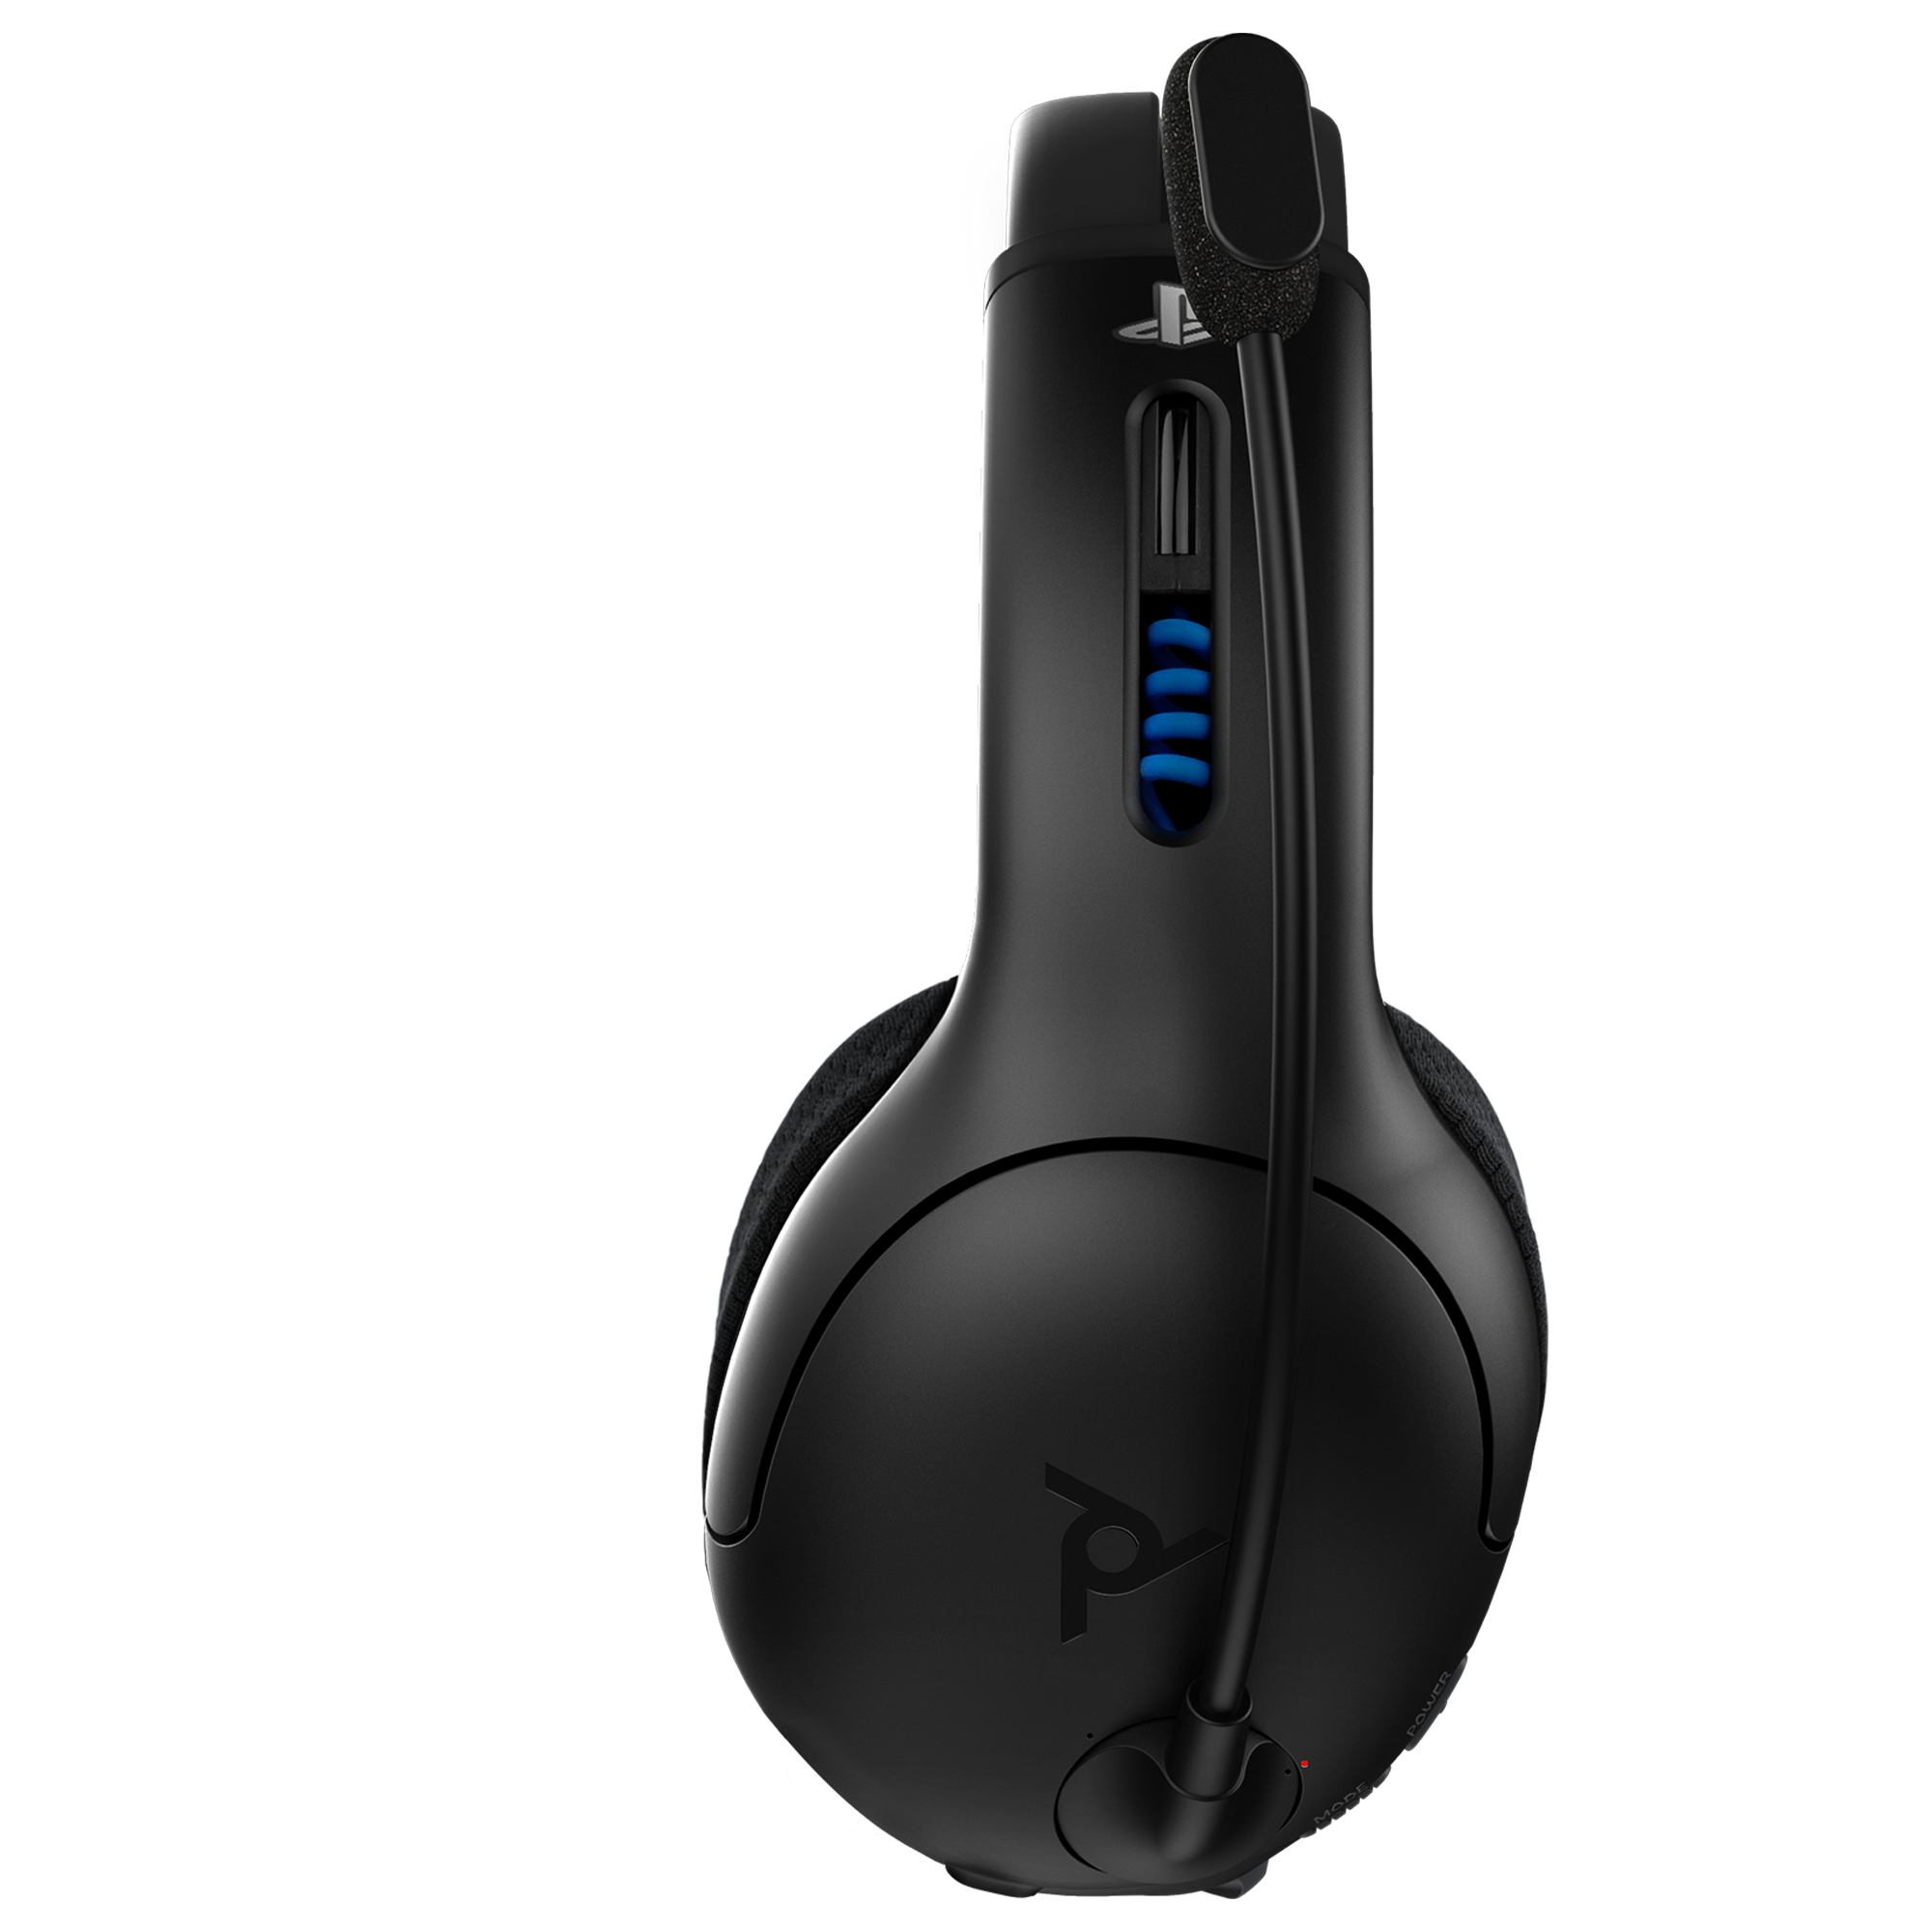 First Look! : PDP LVL50 Wireless Stereo Gaming Headset REVIEW 